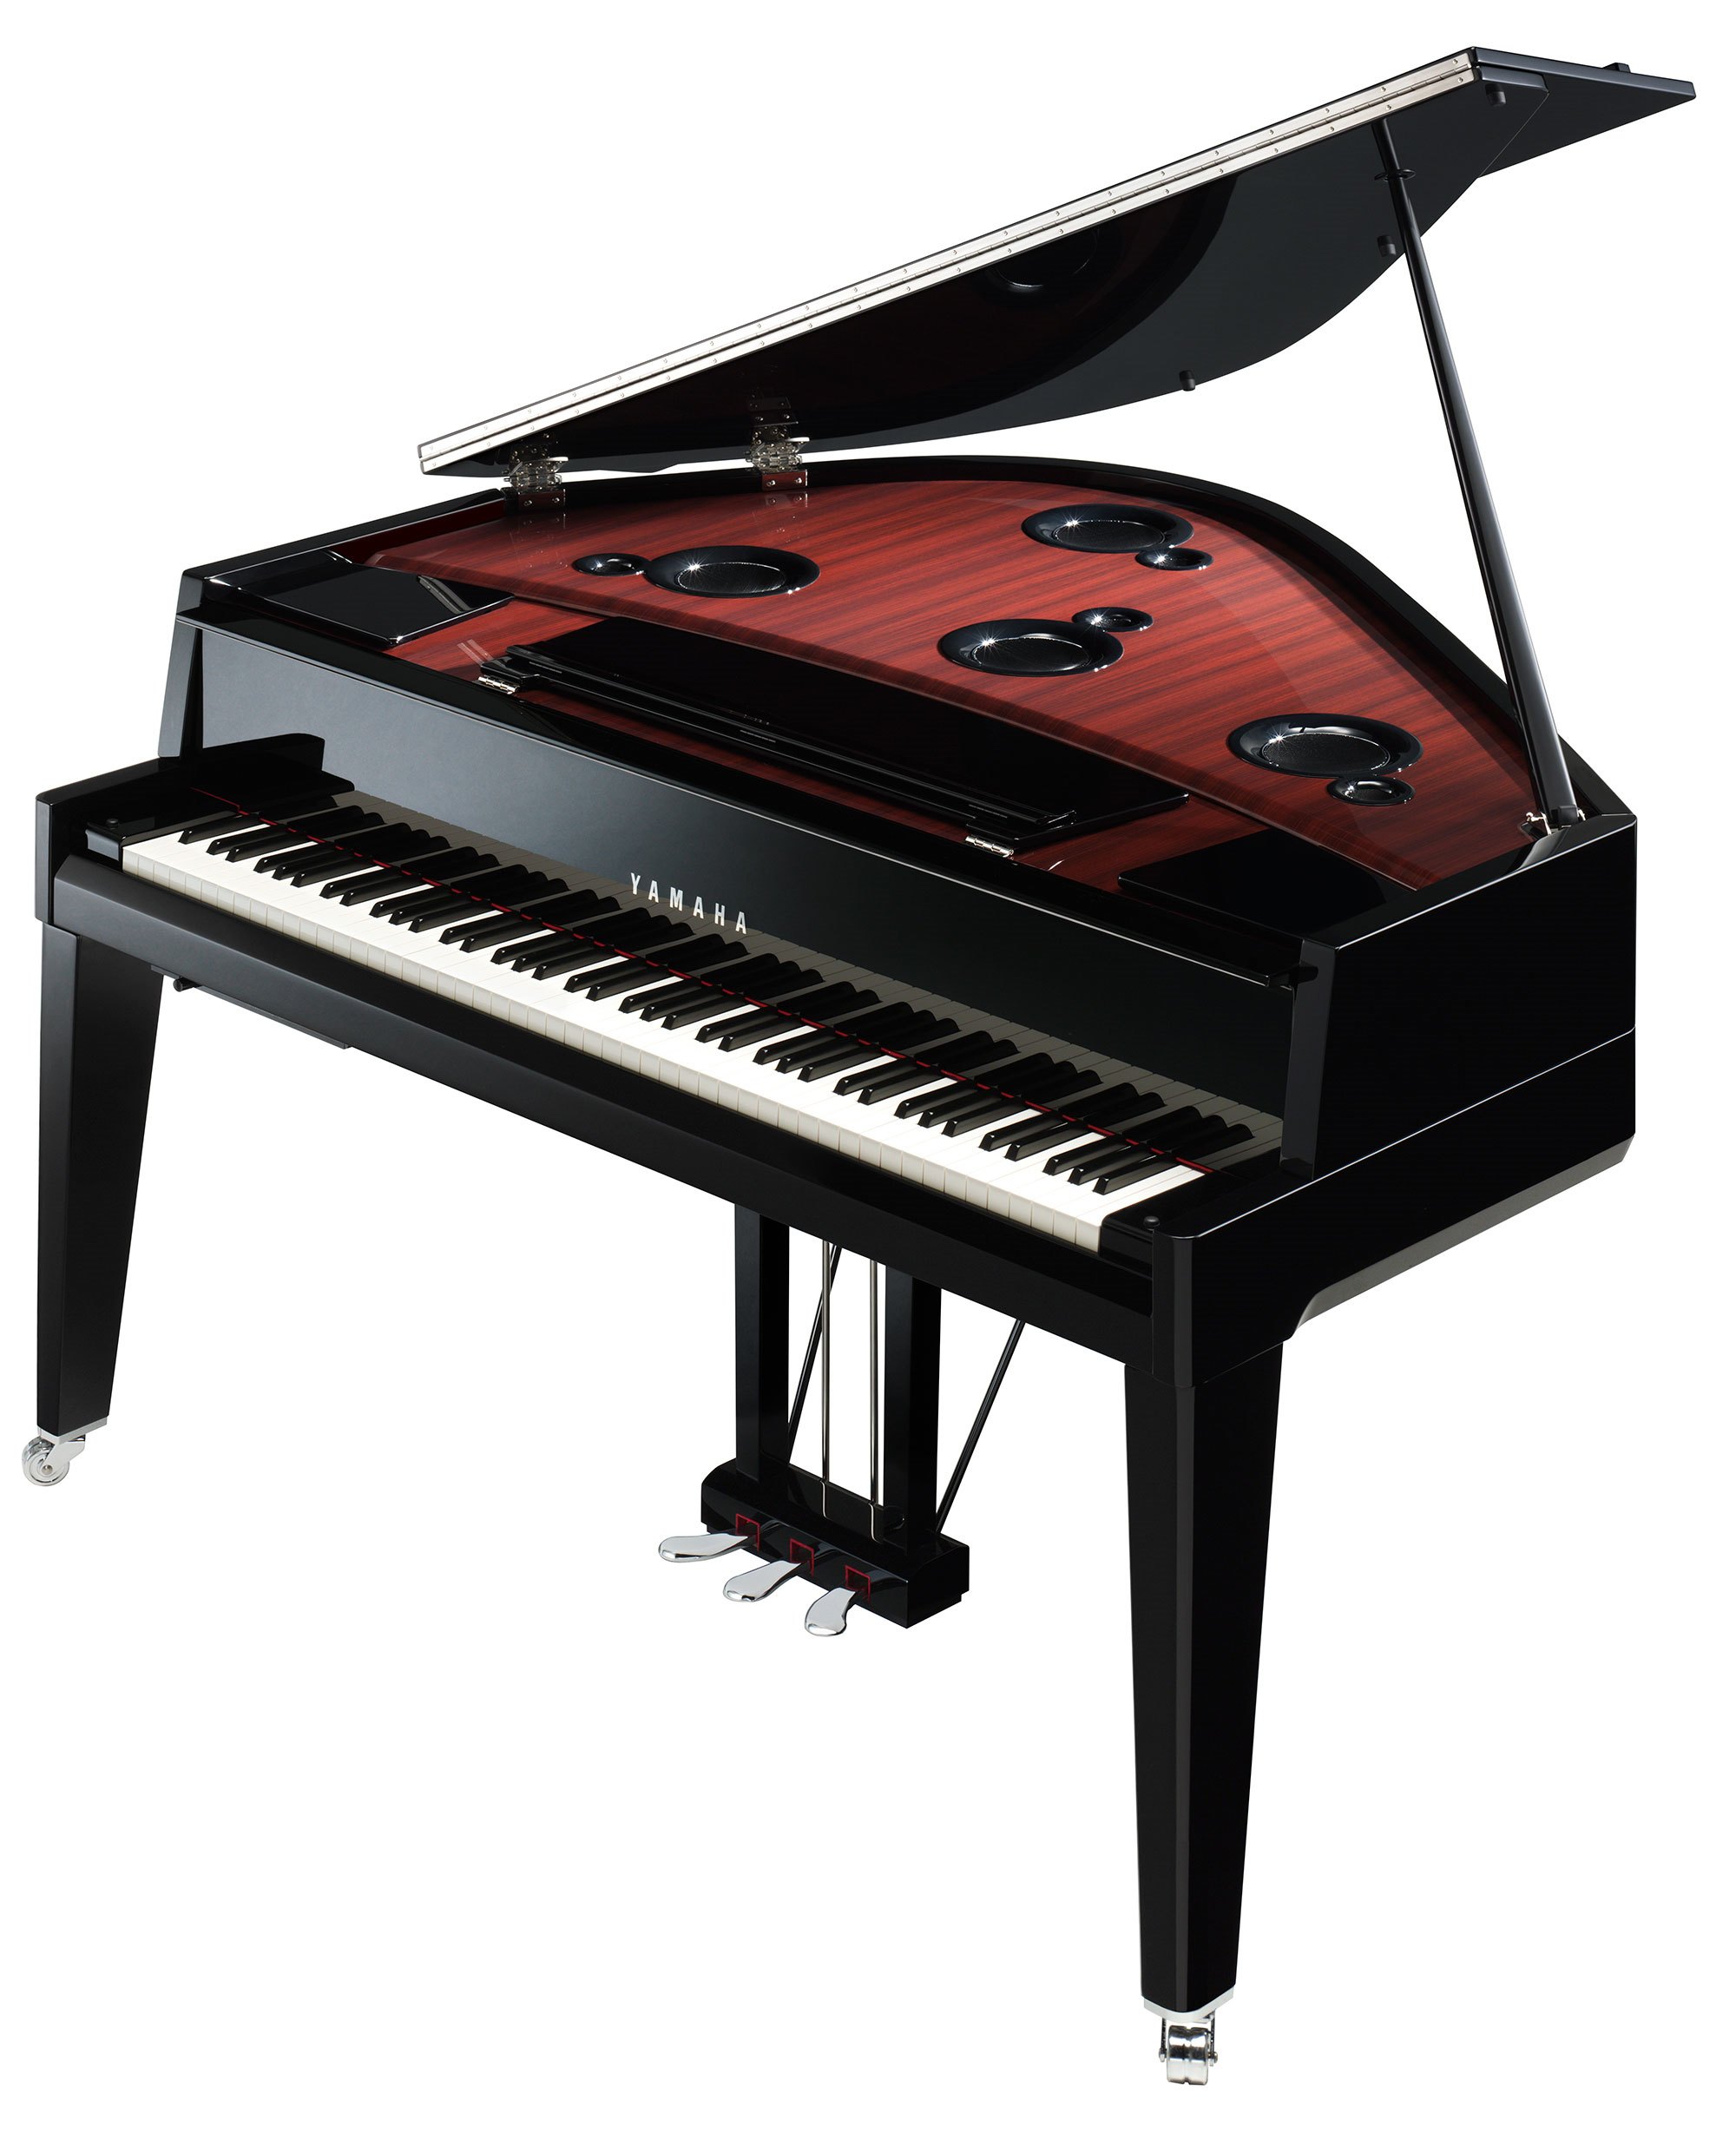 N3X - Overview - AvantGrand - Pianos - Musical Instruments 